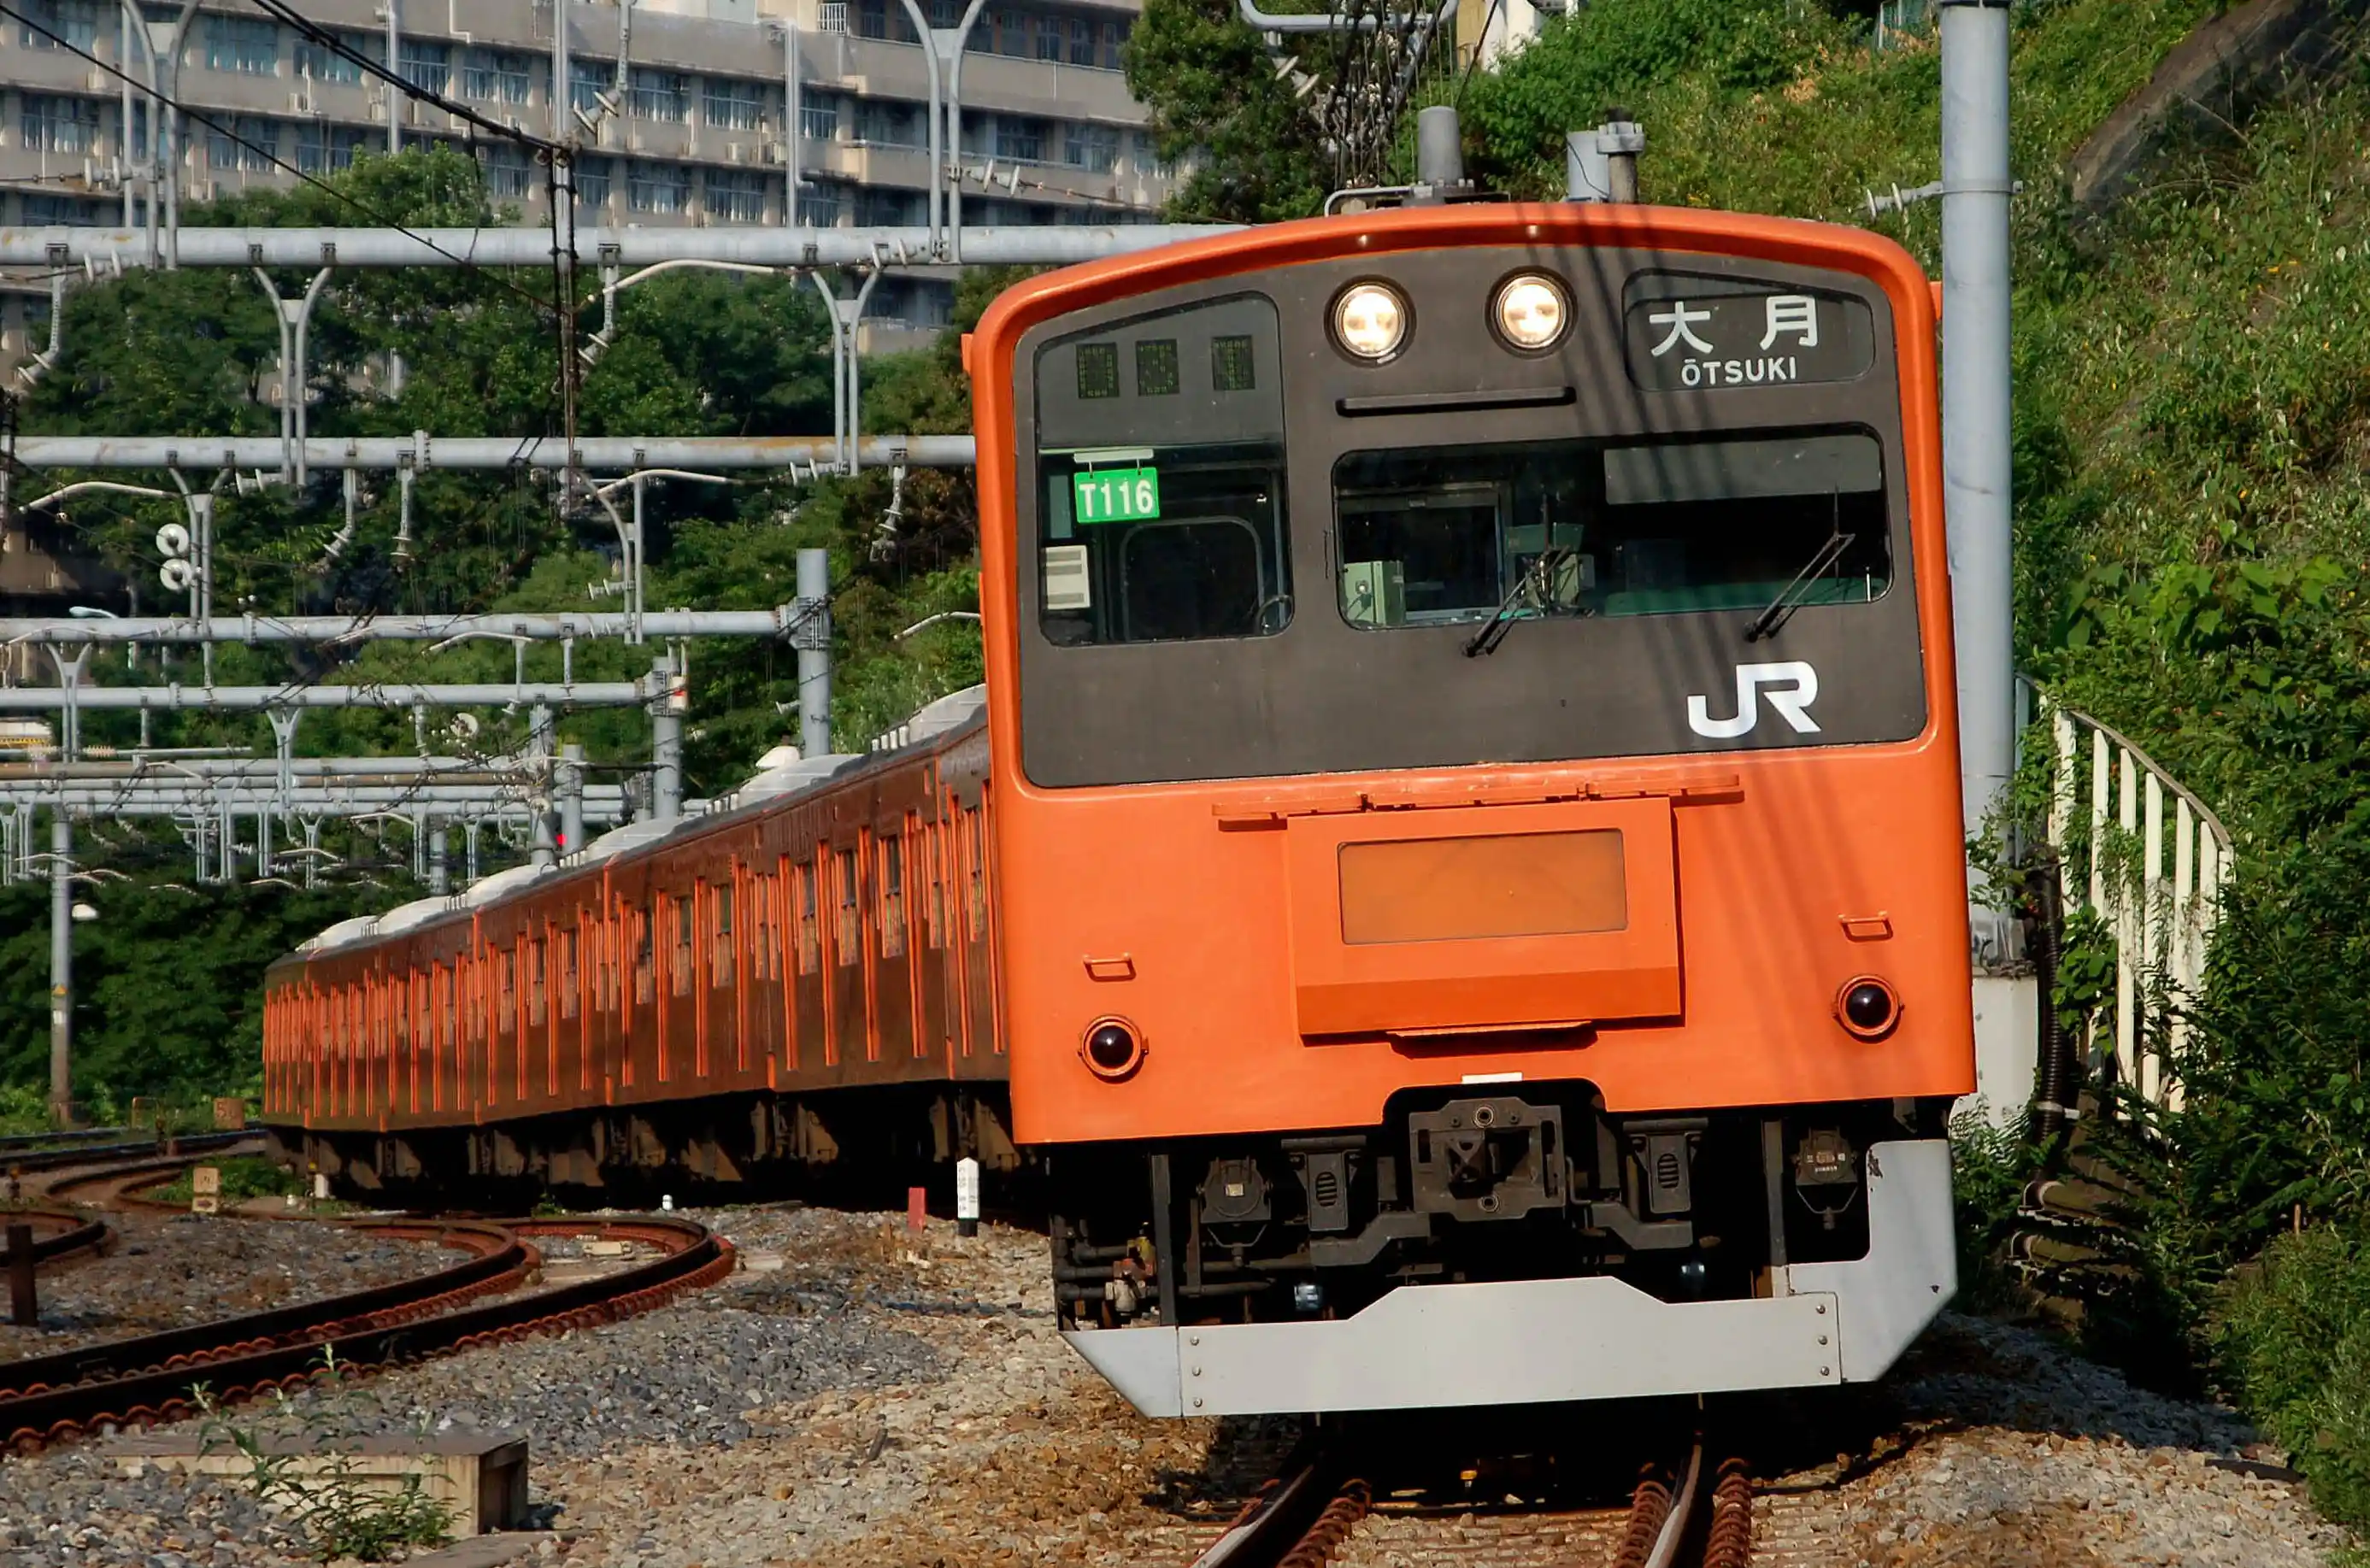 Sui-setz - cropped from file:JR201orange.jpg, パブリック・ドメイン, https://commons.wikimedia.org/w/index.php?curid=65222685による